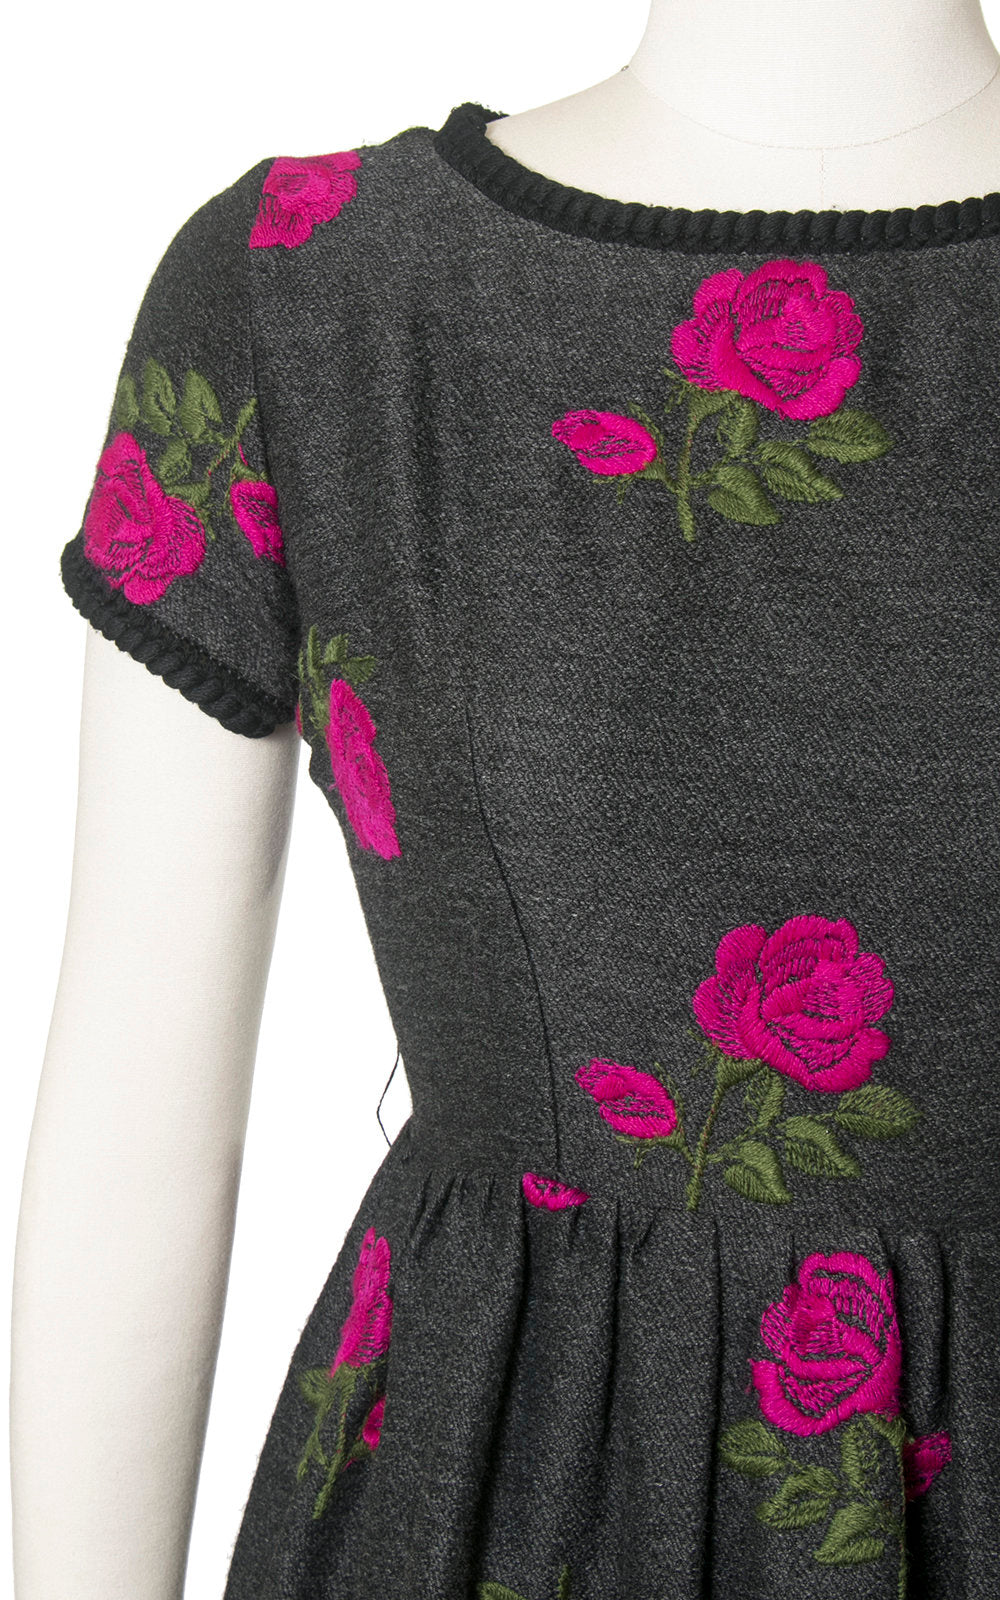 Vintage 1950s Dress | 50s Rose Floral Embroidered Wool Grey Gray Full Skirt Day Dress (medium)